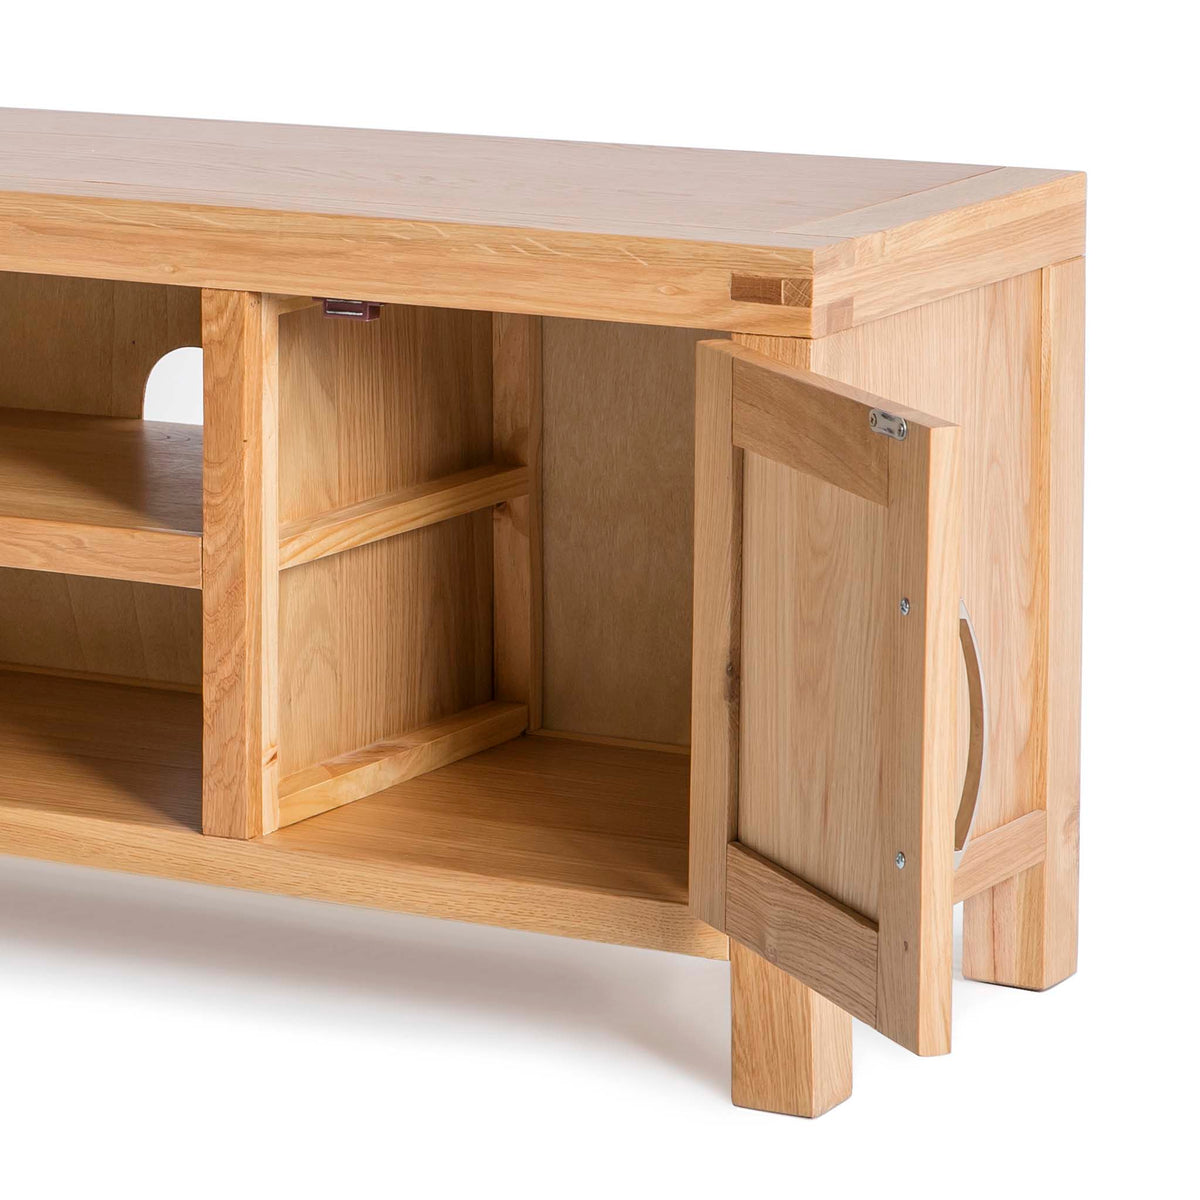 The Abbey Light Oak Large TV Stand - Side view close up with cupboard door open